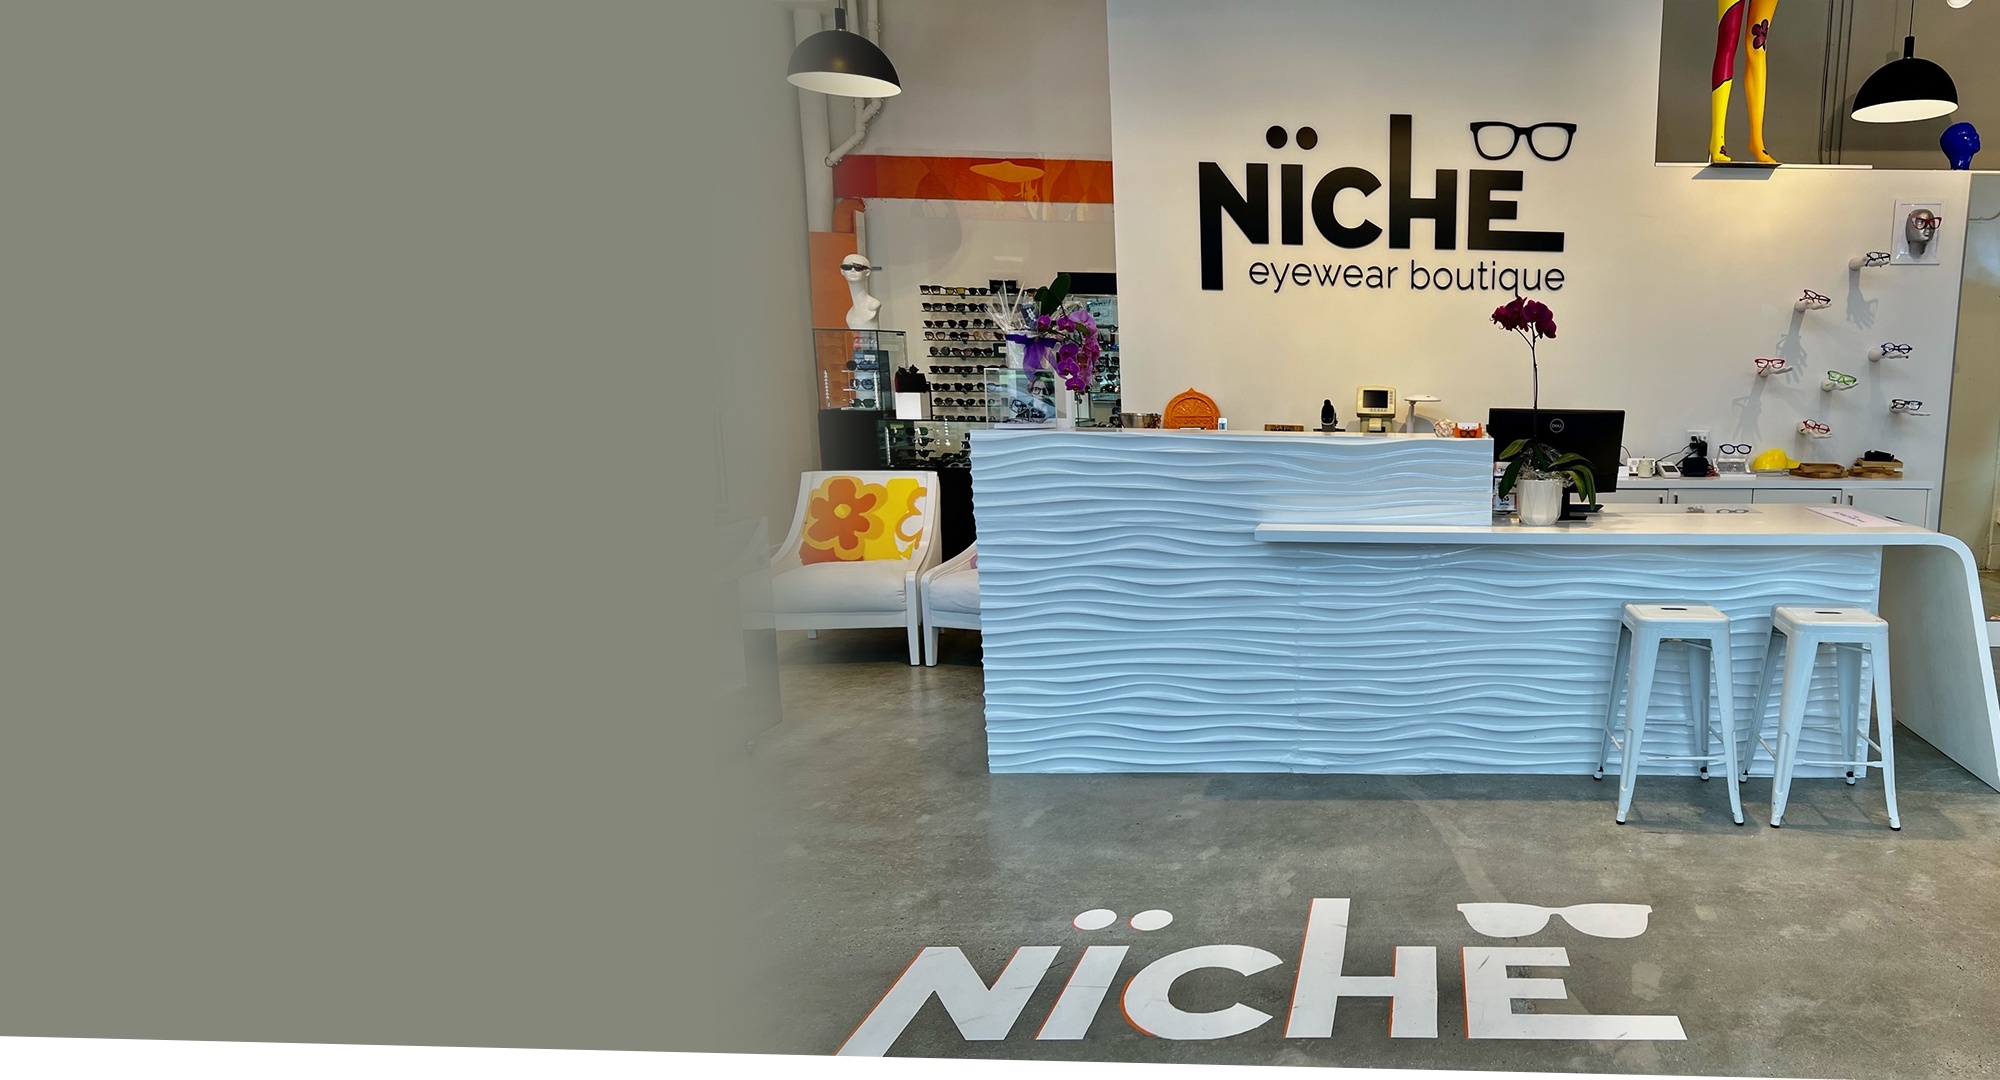 Elevate Your Style with Niche Eyewear Boutique: Where Fashion Meets Function